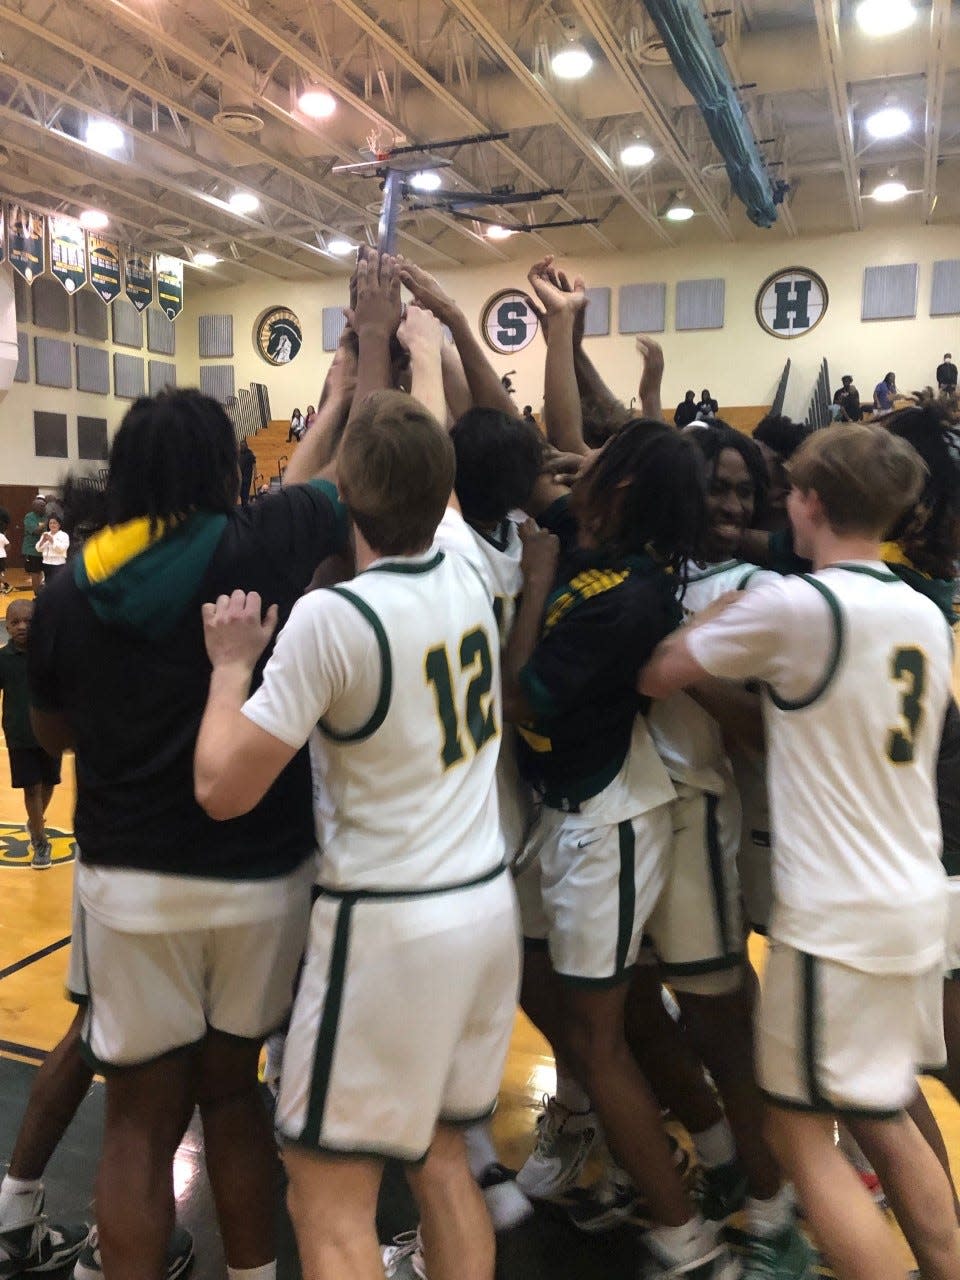 Suncoast players celebrate on the court moments after beating Fort Lauderdale-Stranahan 72-55 to win the District 14-5A title Friday night in Riviera Beach.